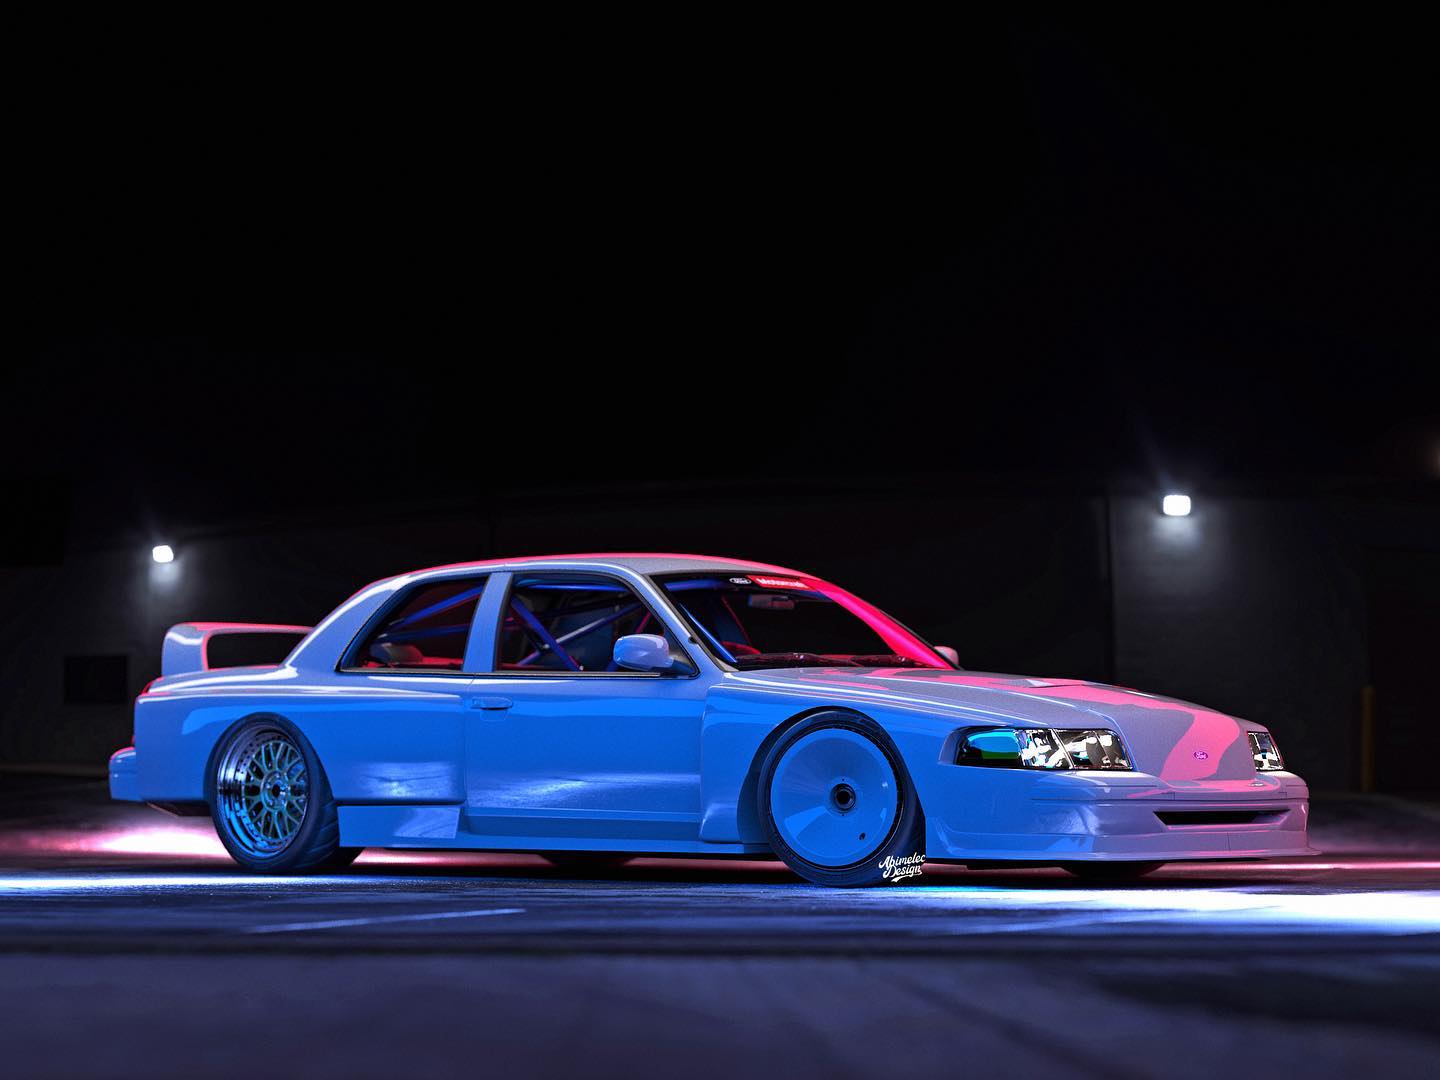 ford-crown-vic-coupe-mixes-digital-1990s-look-with-unbound-slammed-widebody-ethos-202173_1.jpg